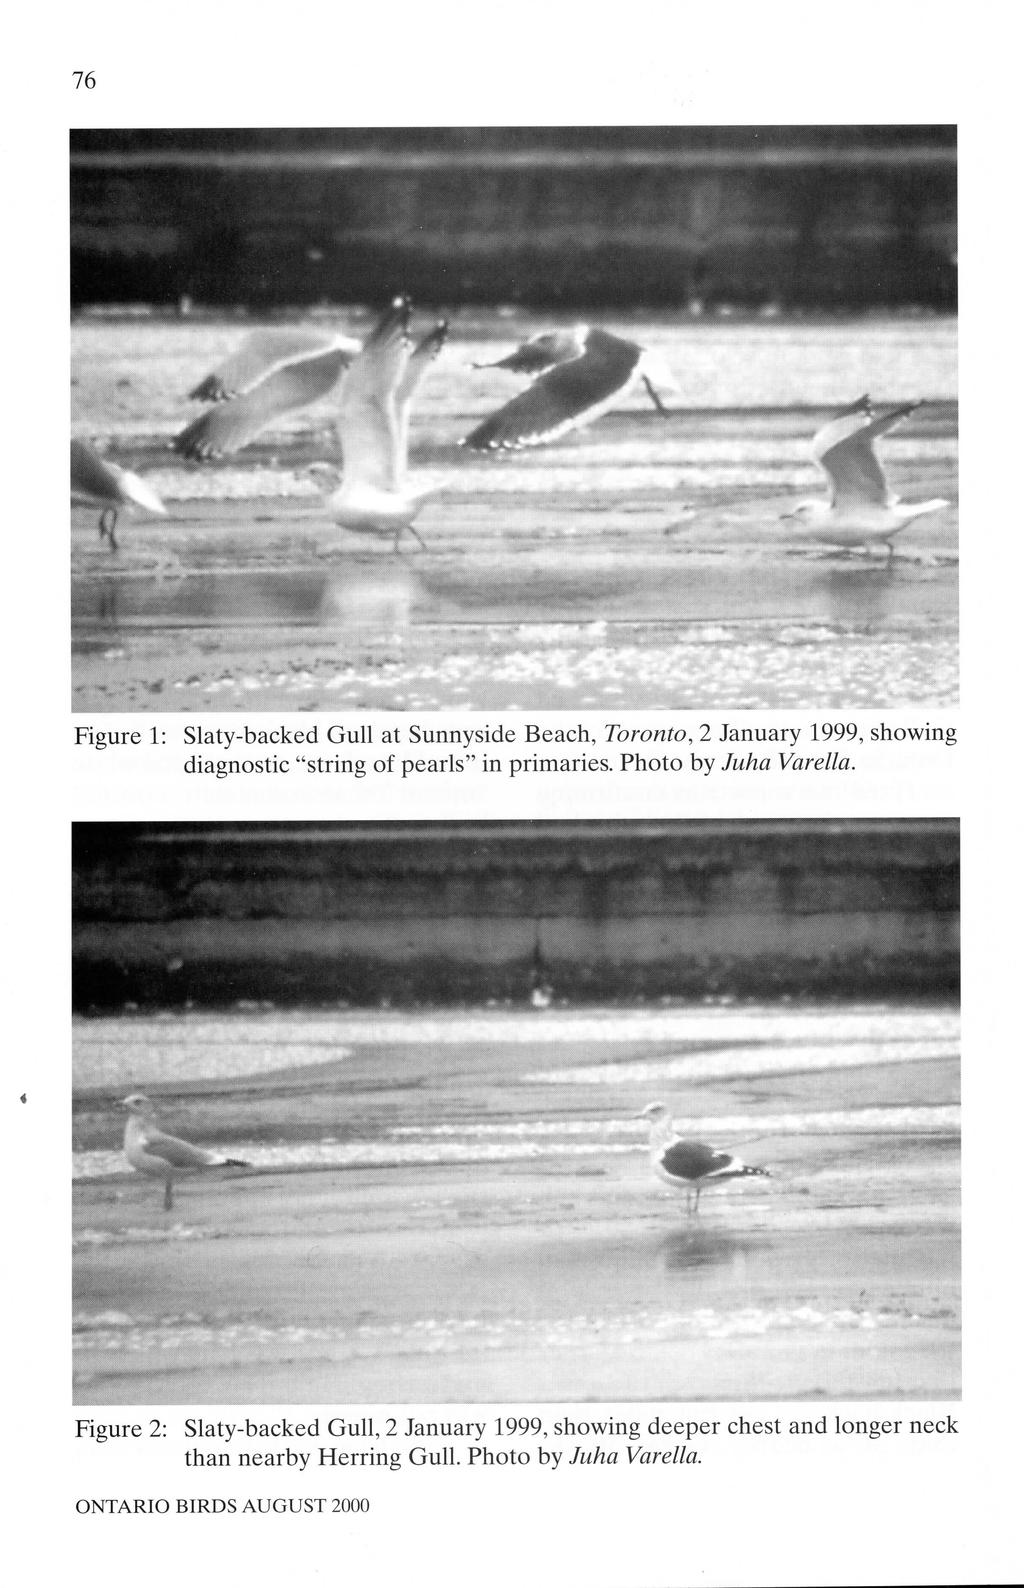 76 Figure 1: Slaty-backed Gull at Sunnyside Beach, Toronto, 2 January 1999, showing diagnostic "string of pearls" in primaries. Photo by Juha Varella.